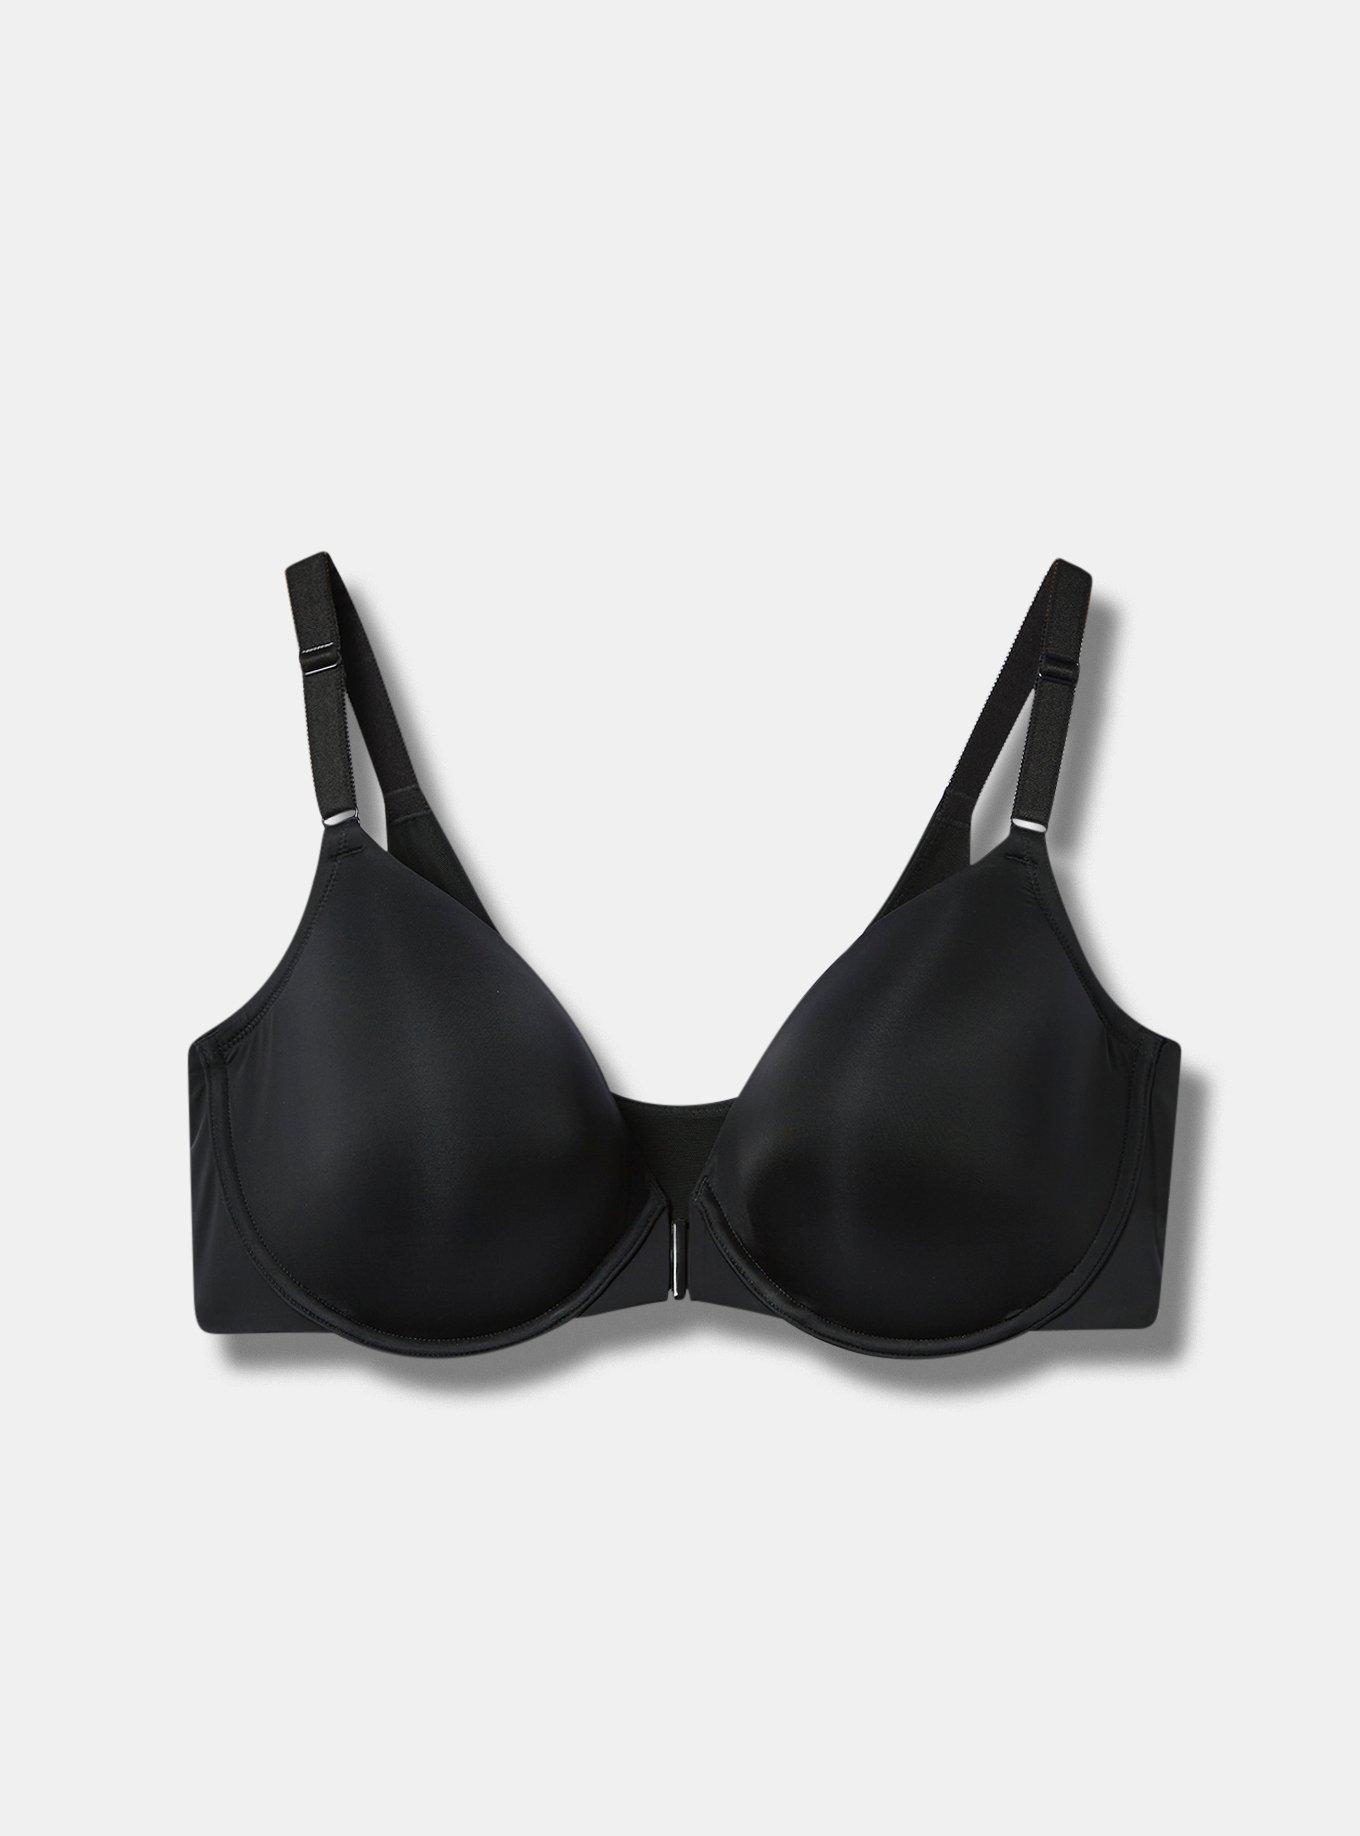 Calvin Klein Modern Cotton Racerback Bralette  Urban Outfitters Japan -  Clothing, Music, Home & Accessories